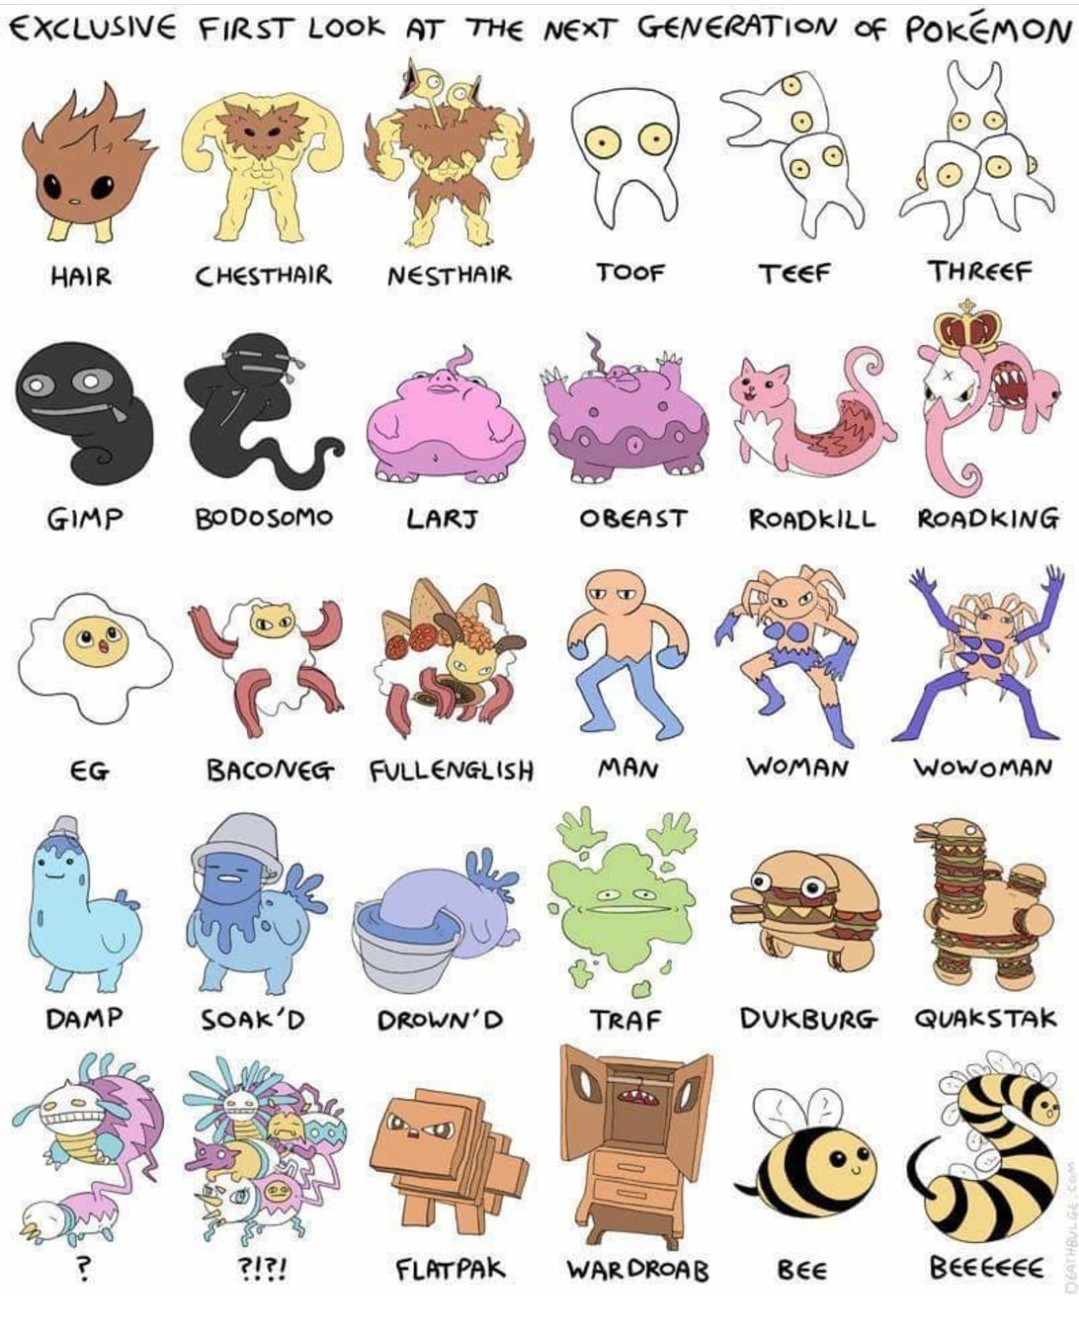 Back in my days, there were 151 pokemon - meme